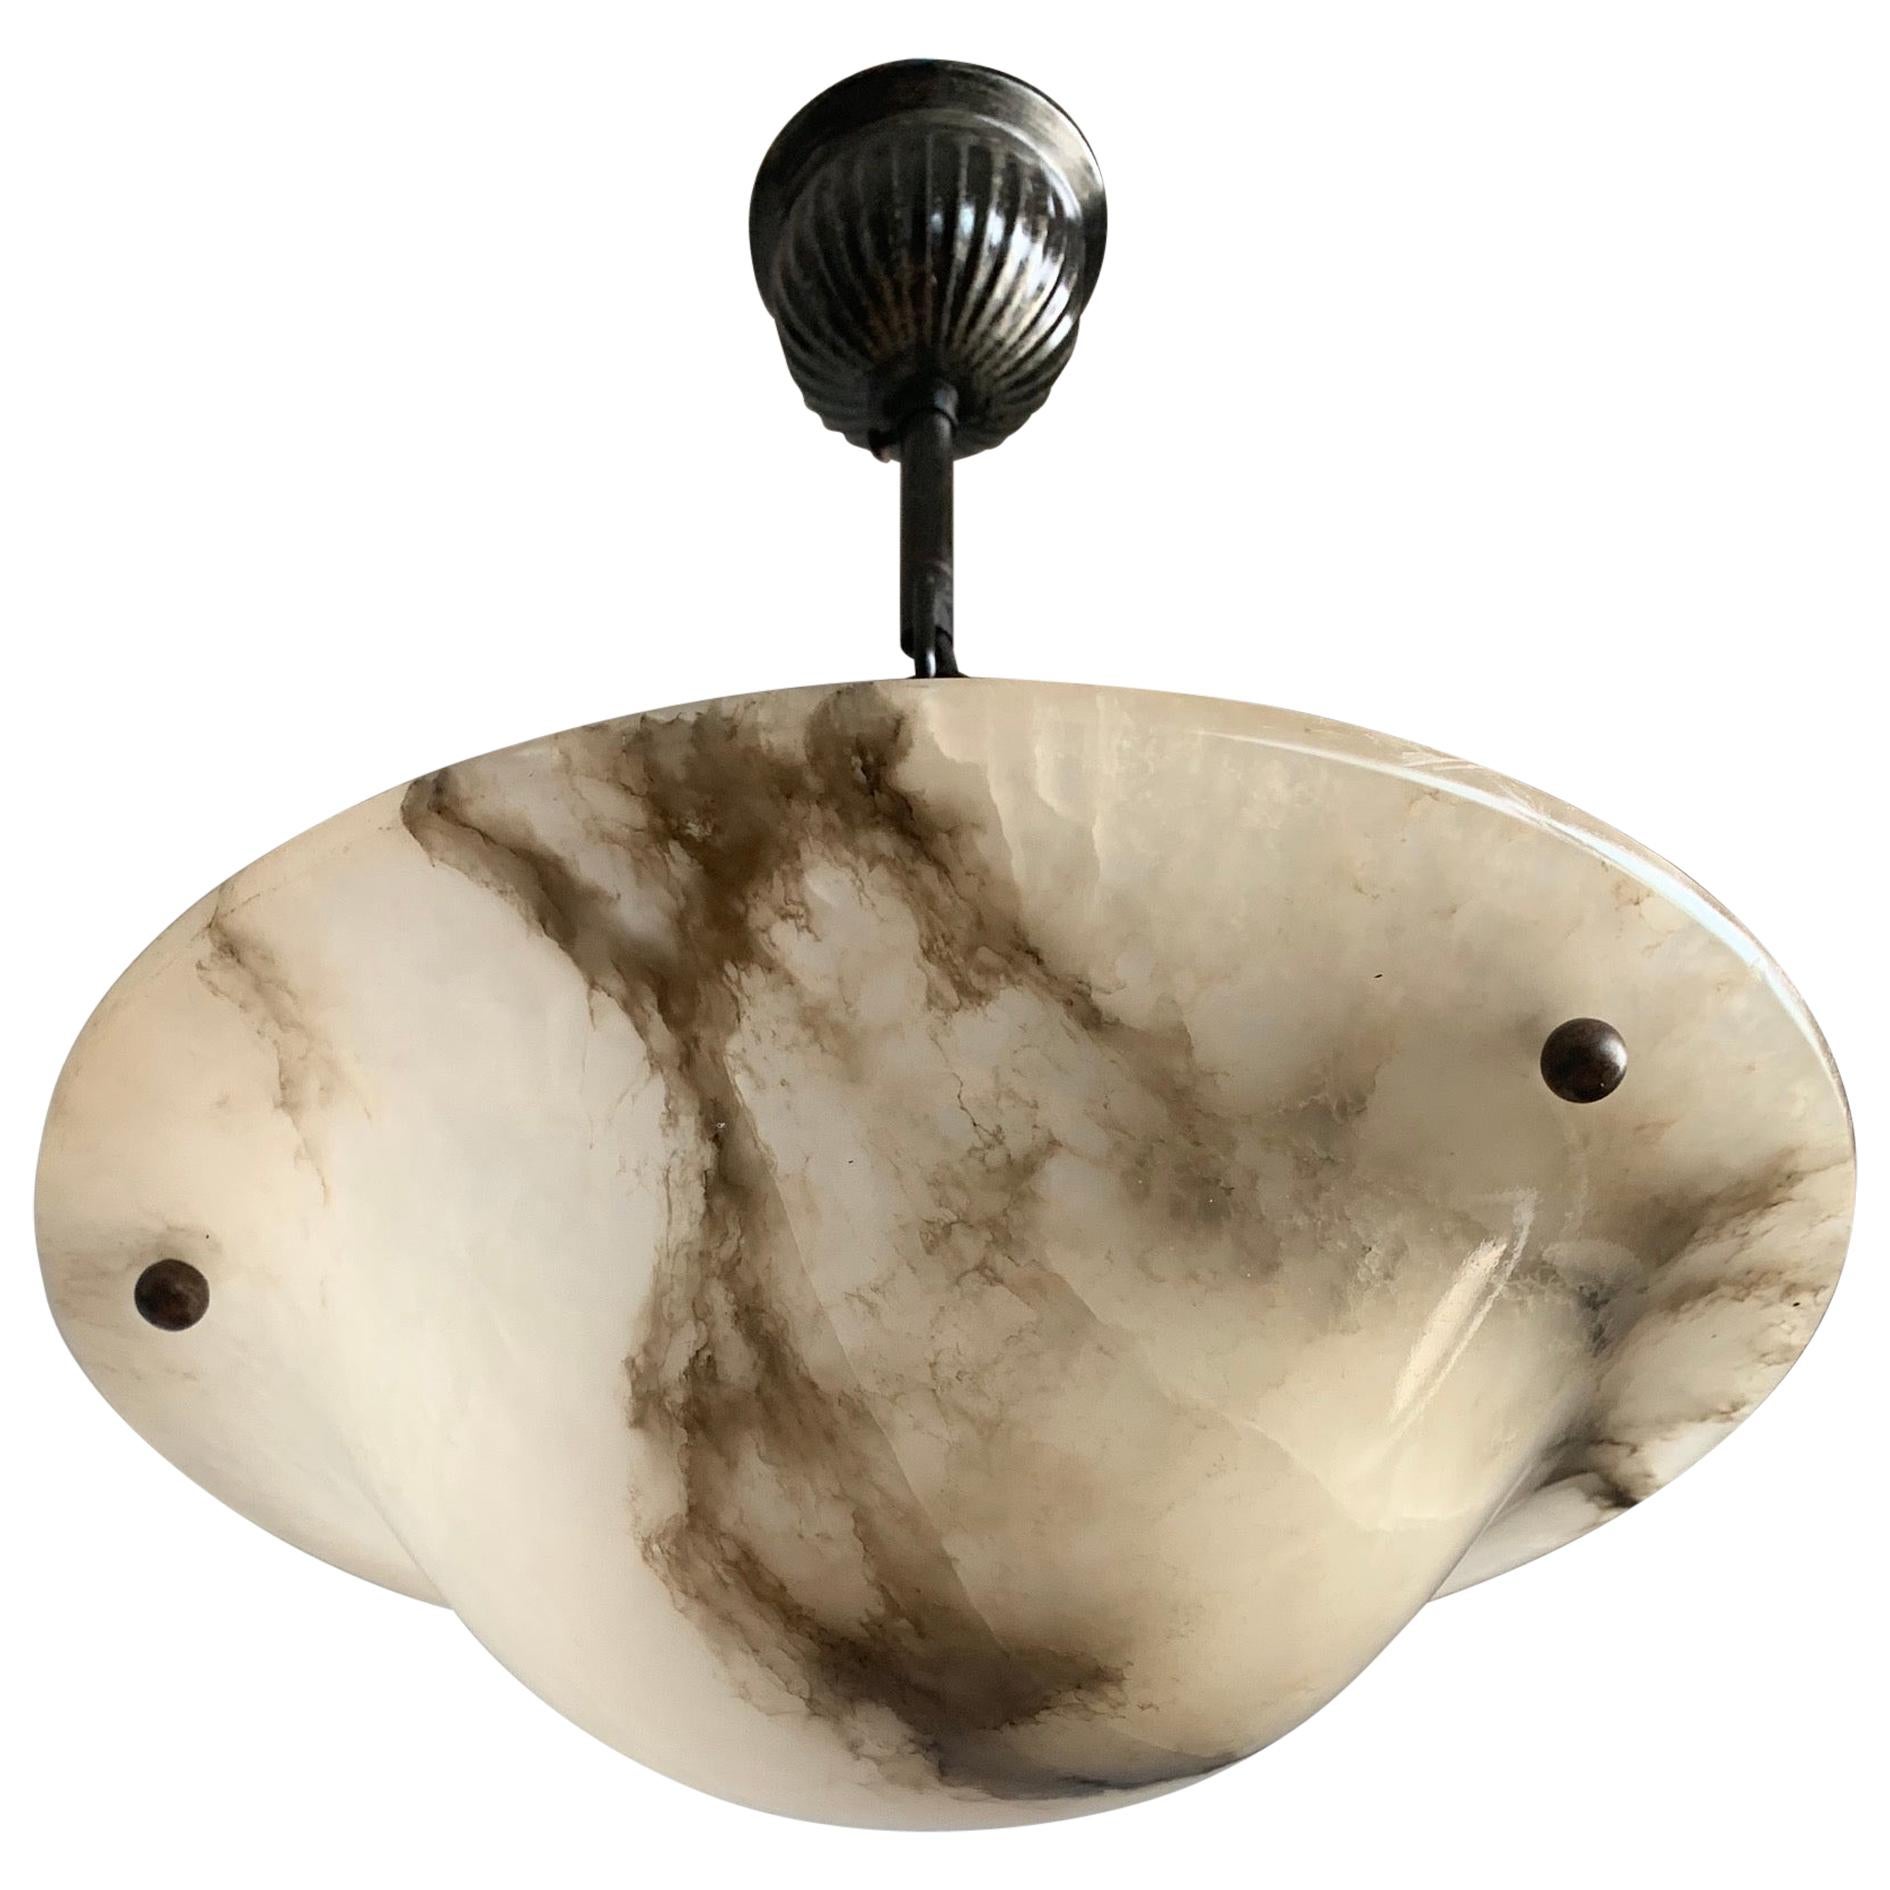 Yet another marvelous light fixture for an entry hall, bedroom or any other small room.

With early 20th century light fixtures being one of our specialties, we always love finding timeless pendants and flush mounts that are in very good condition.